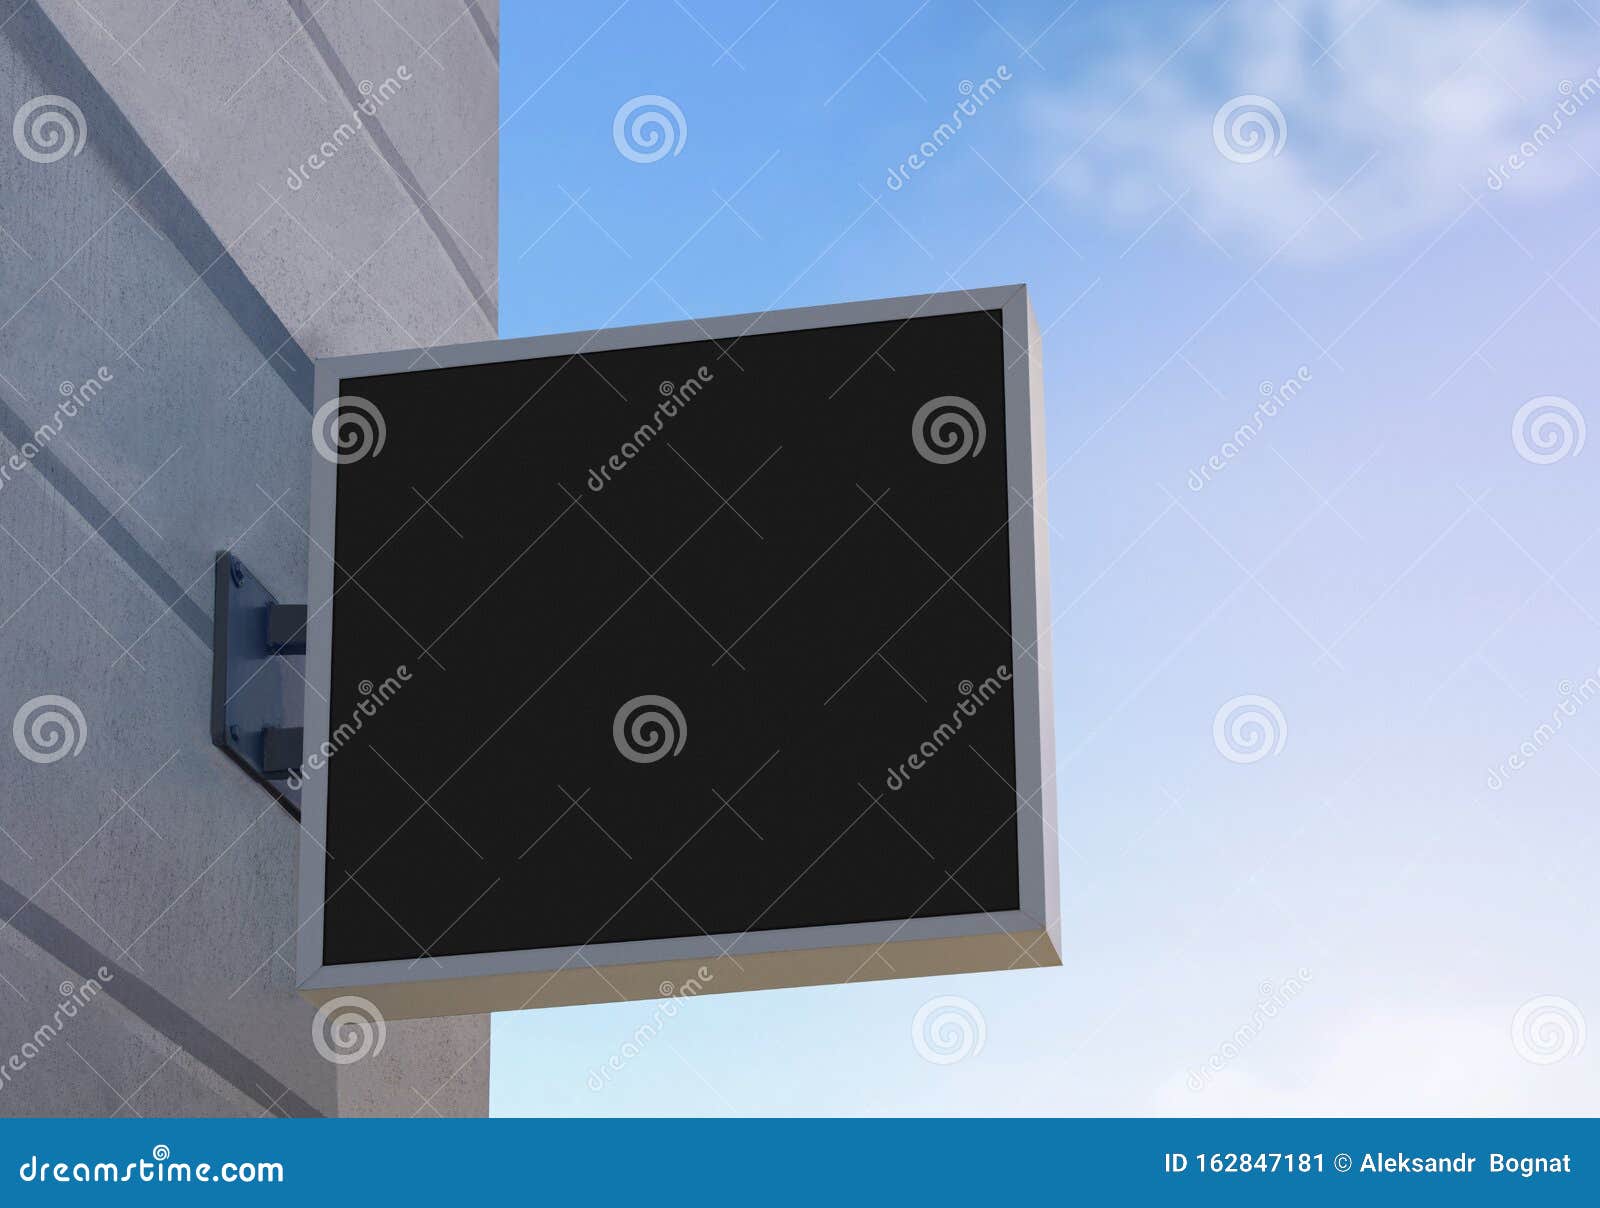 Download Blank Black Square Banner With Gray Frame Mockup Stock Image Image Of Cafe Clinic 162847181 Yellowimages Mockups